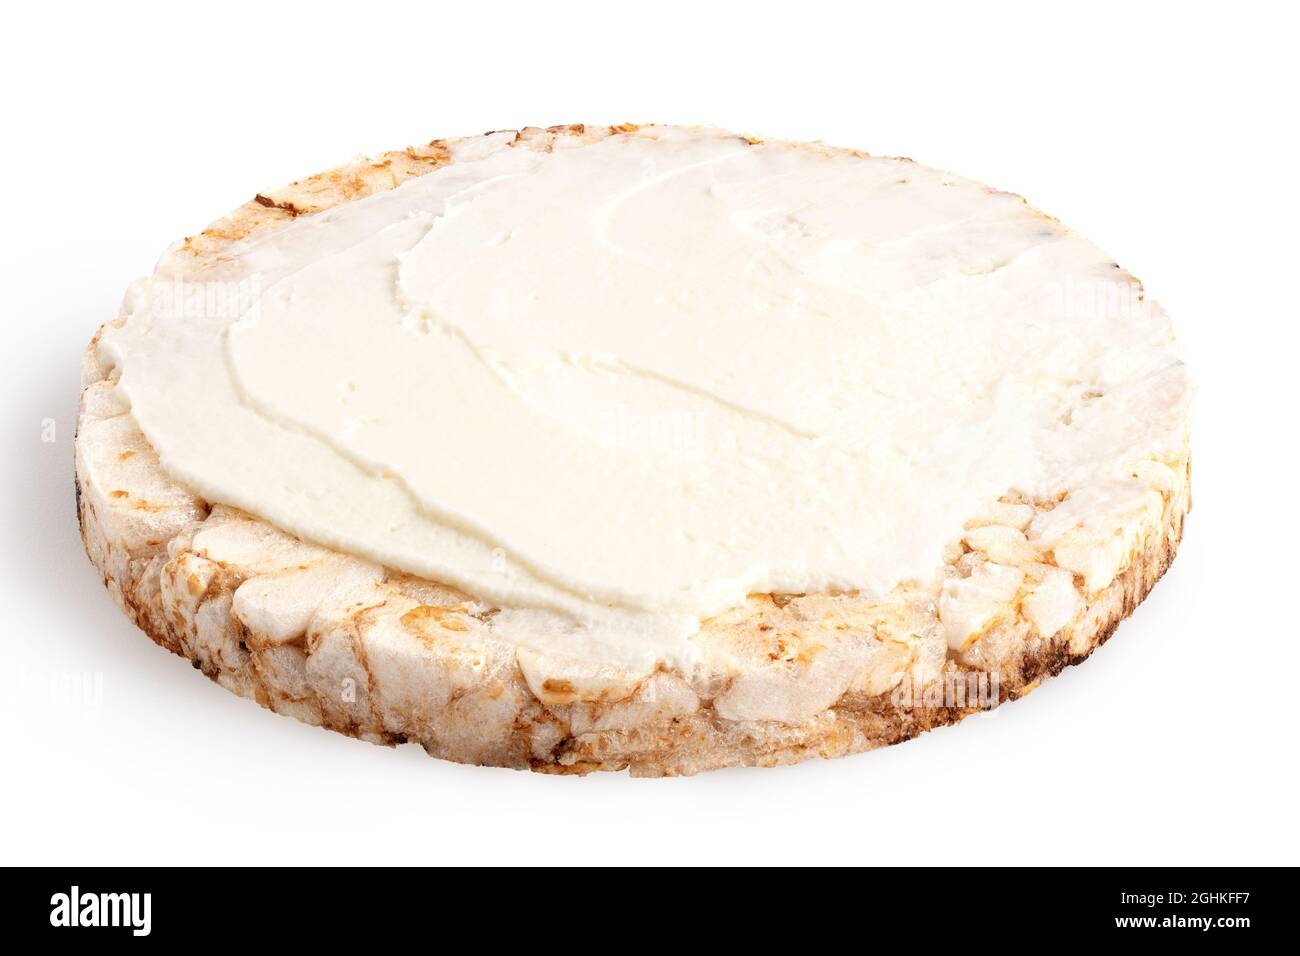 Puffed brown rice cake with cream cheese spread isolated on white. Stock Photo